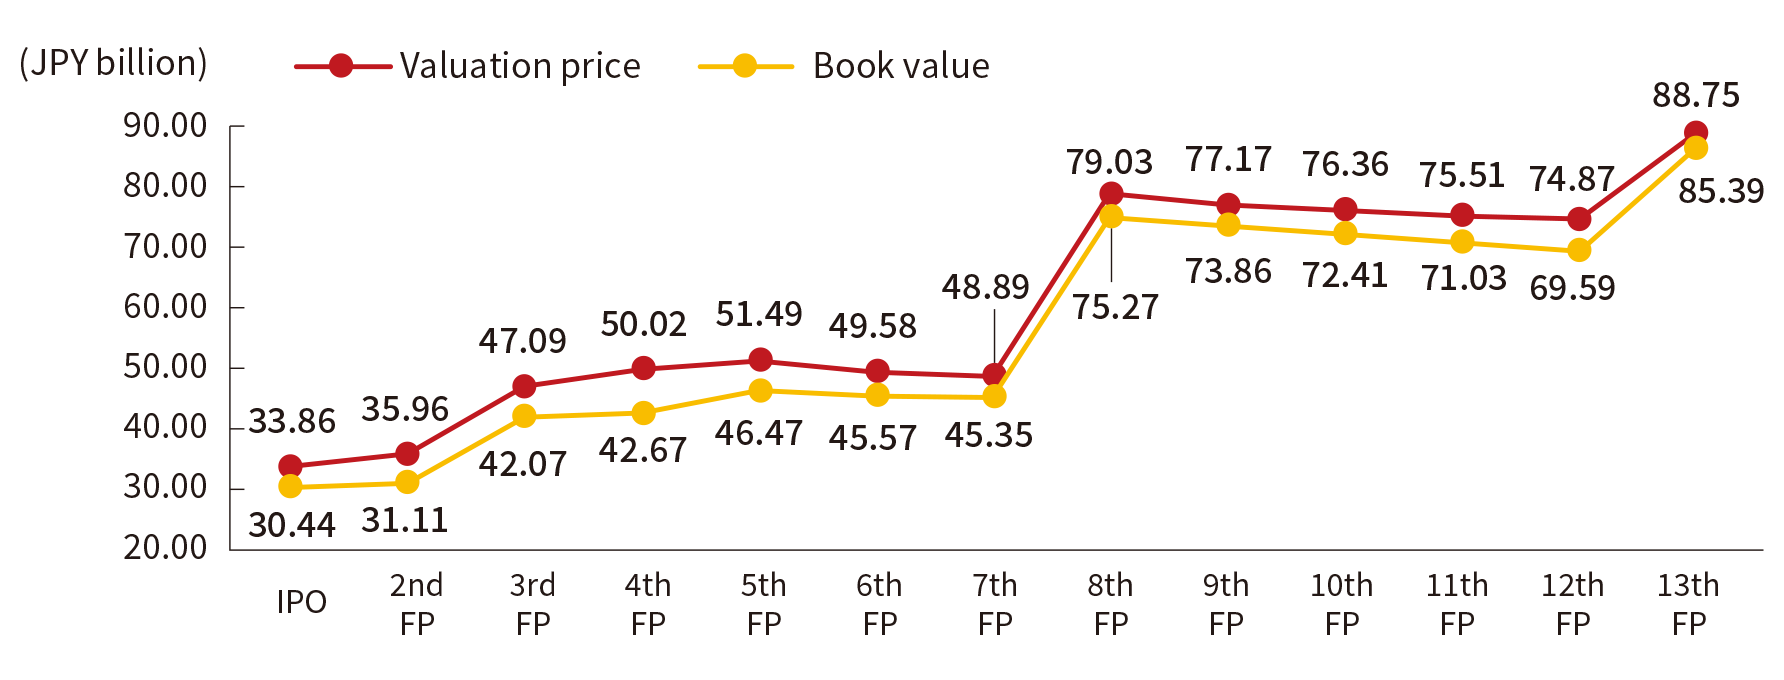 Historical valuation and book value (after depreciation)